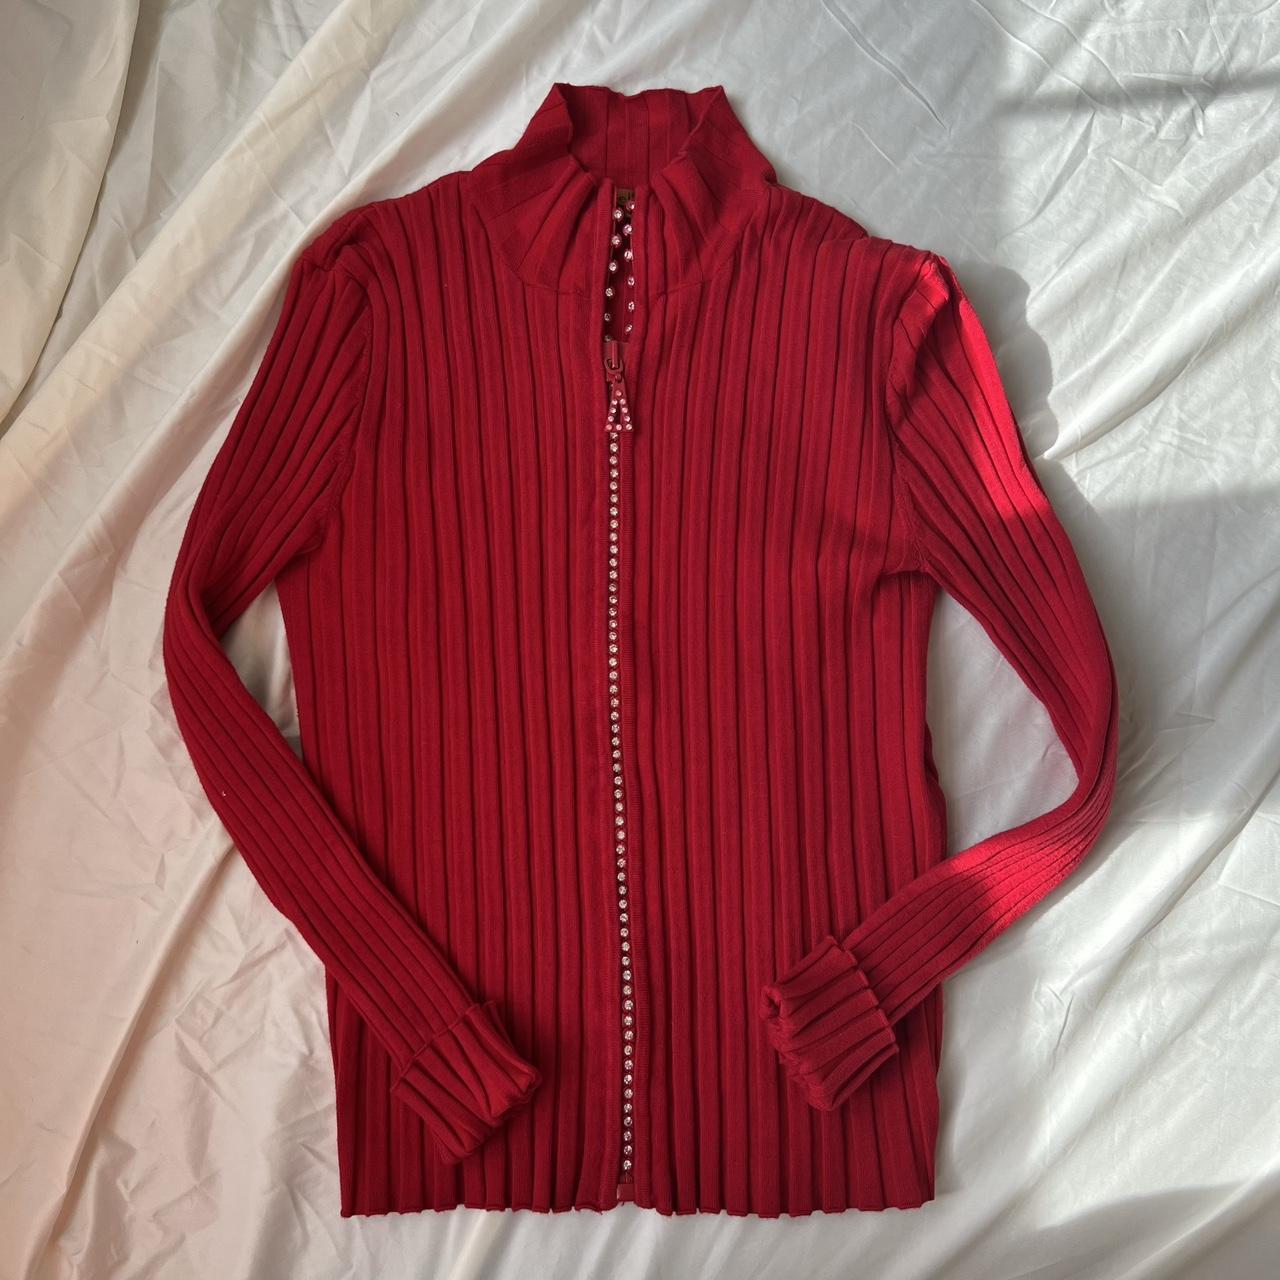 Belldini Women's Red and Silver Cardigan